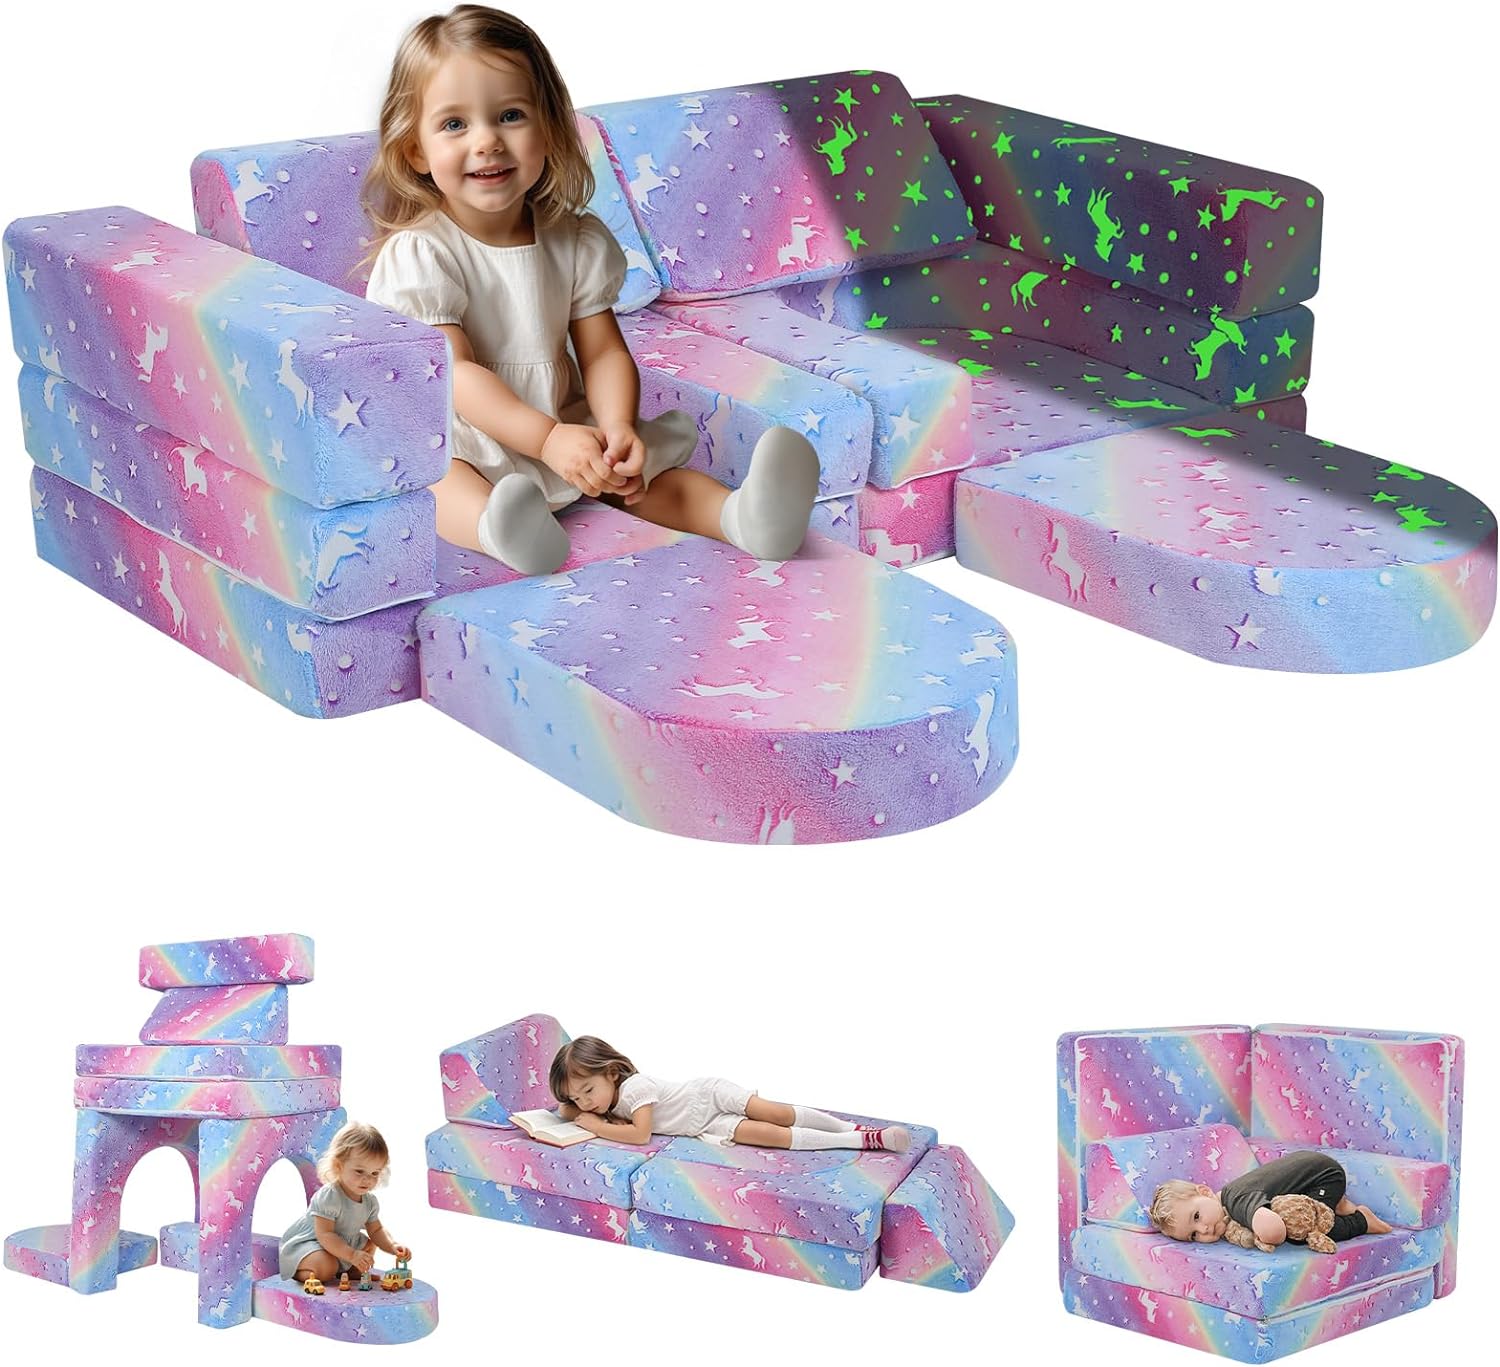 MeMoreCool 10-Piece Couch Sofa, Modular Toddler Glow Sofa for Playroom Bedroom, Fold Out Play Couch for Kid Girl Boy, Sectional Foam Playset Couch Set, Rainbow